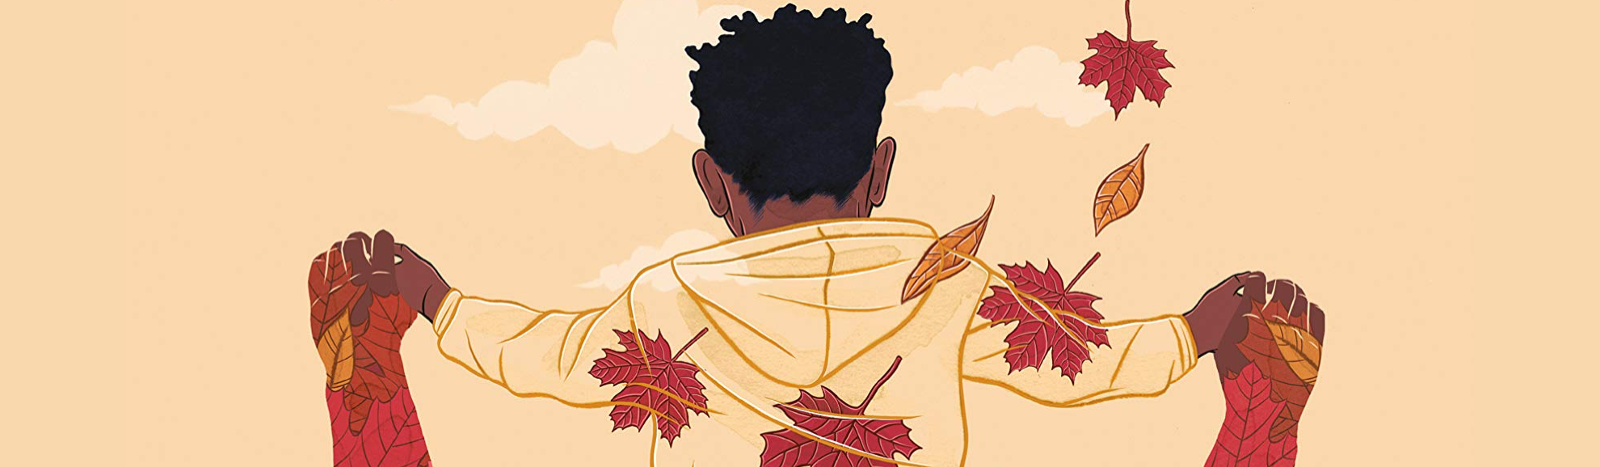 Before the Ever After by Jacqueline Woodson – Book Review